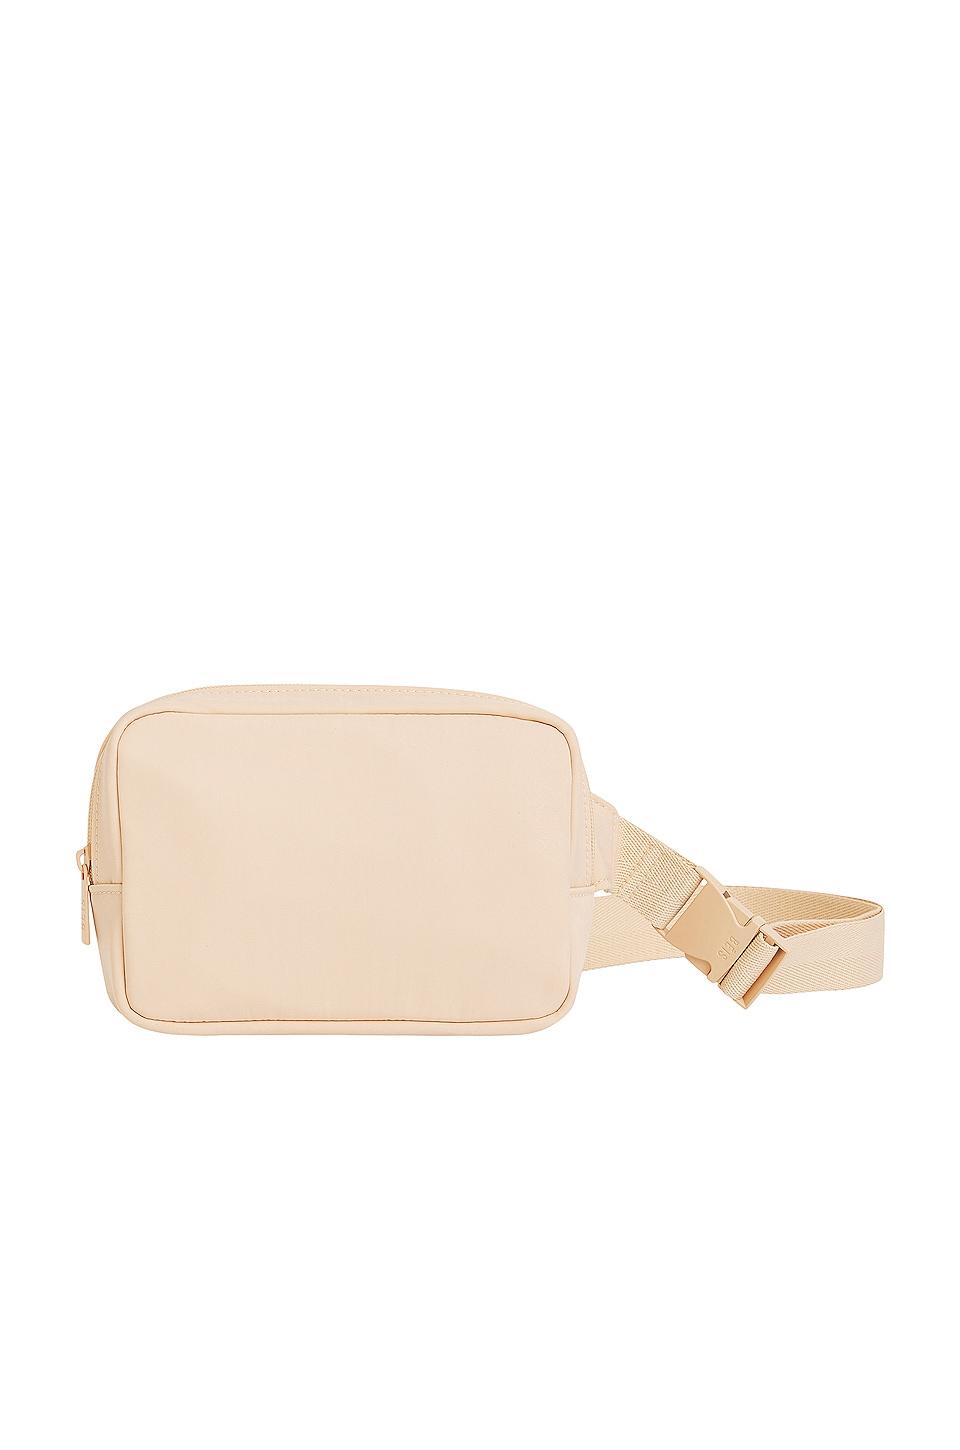 BEIS The Belt Bag in Natural | Lyst